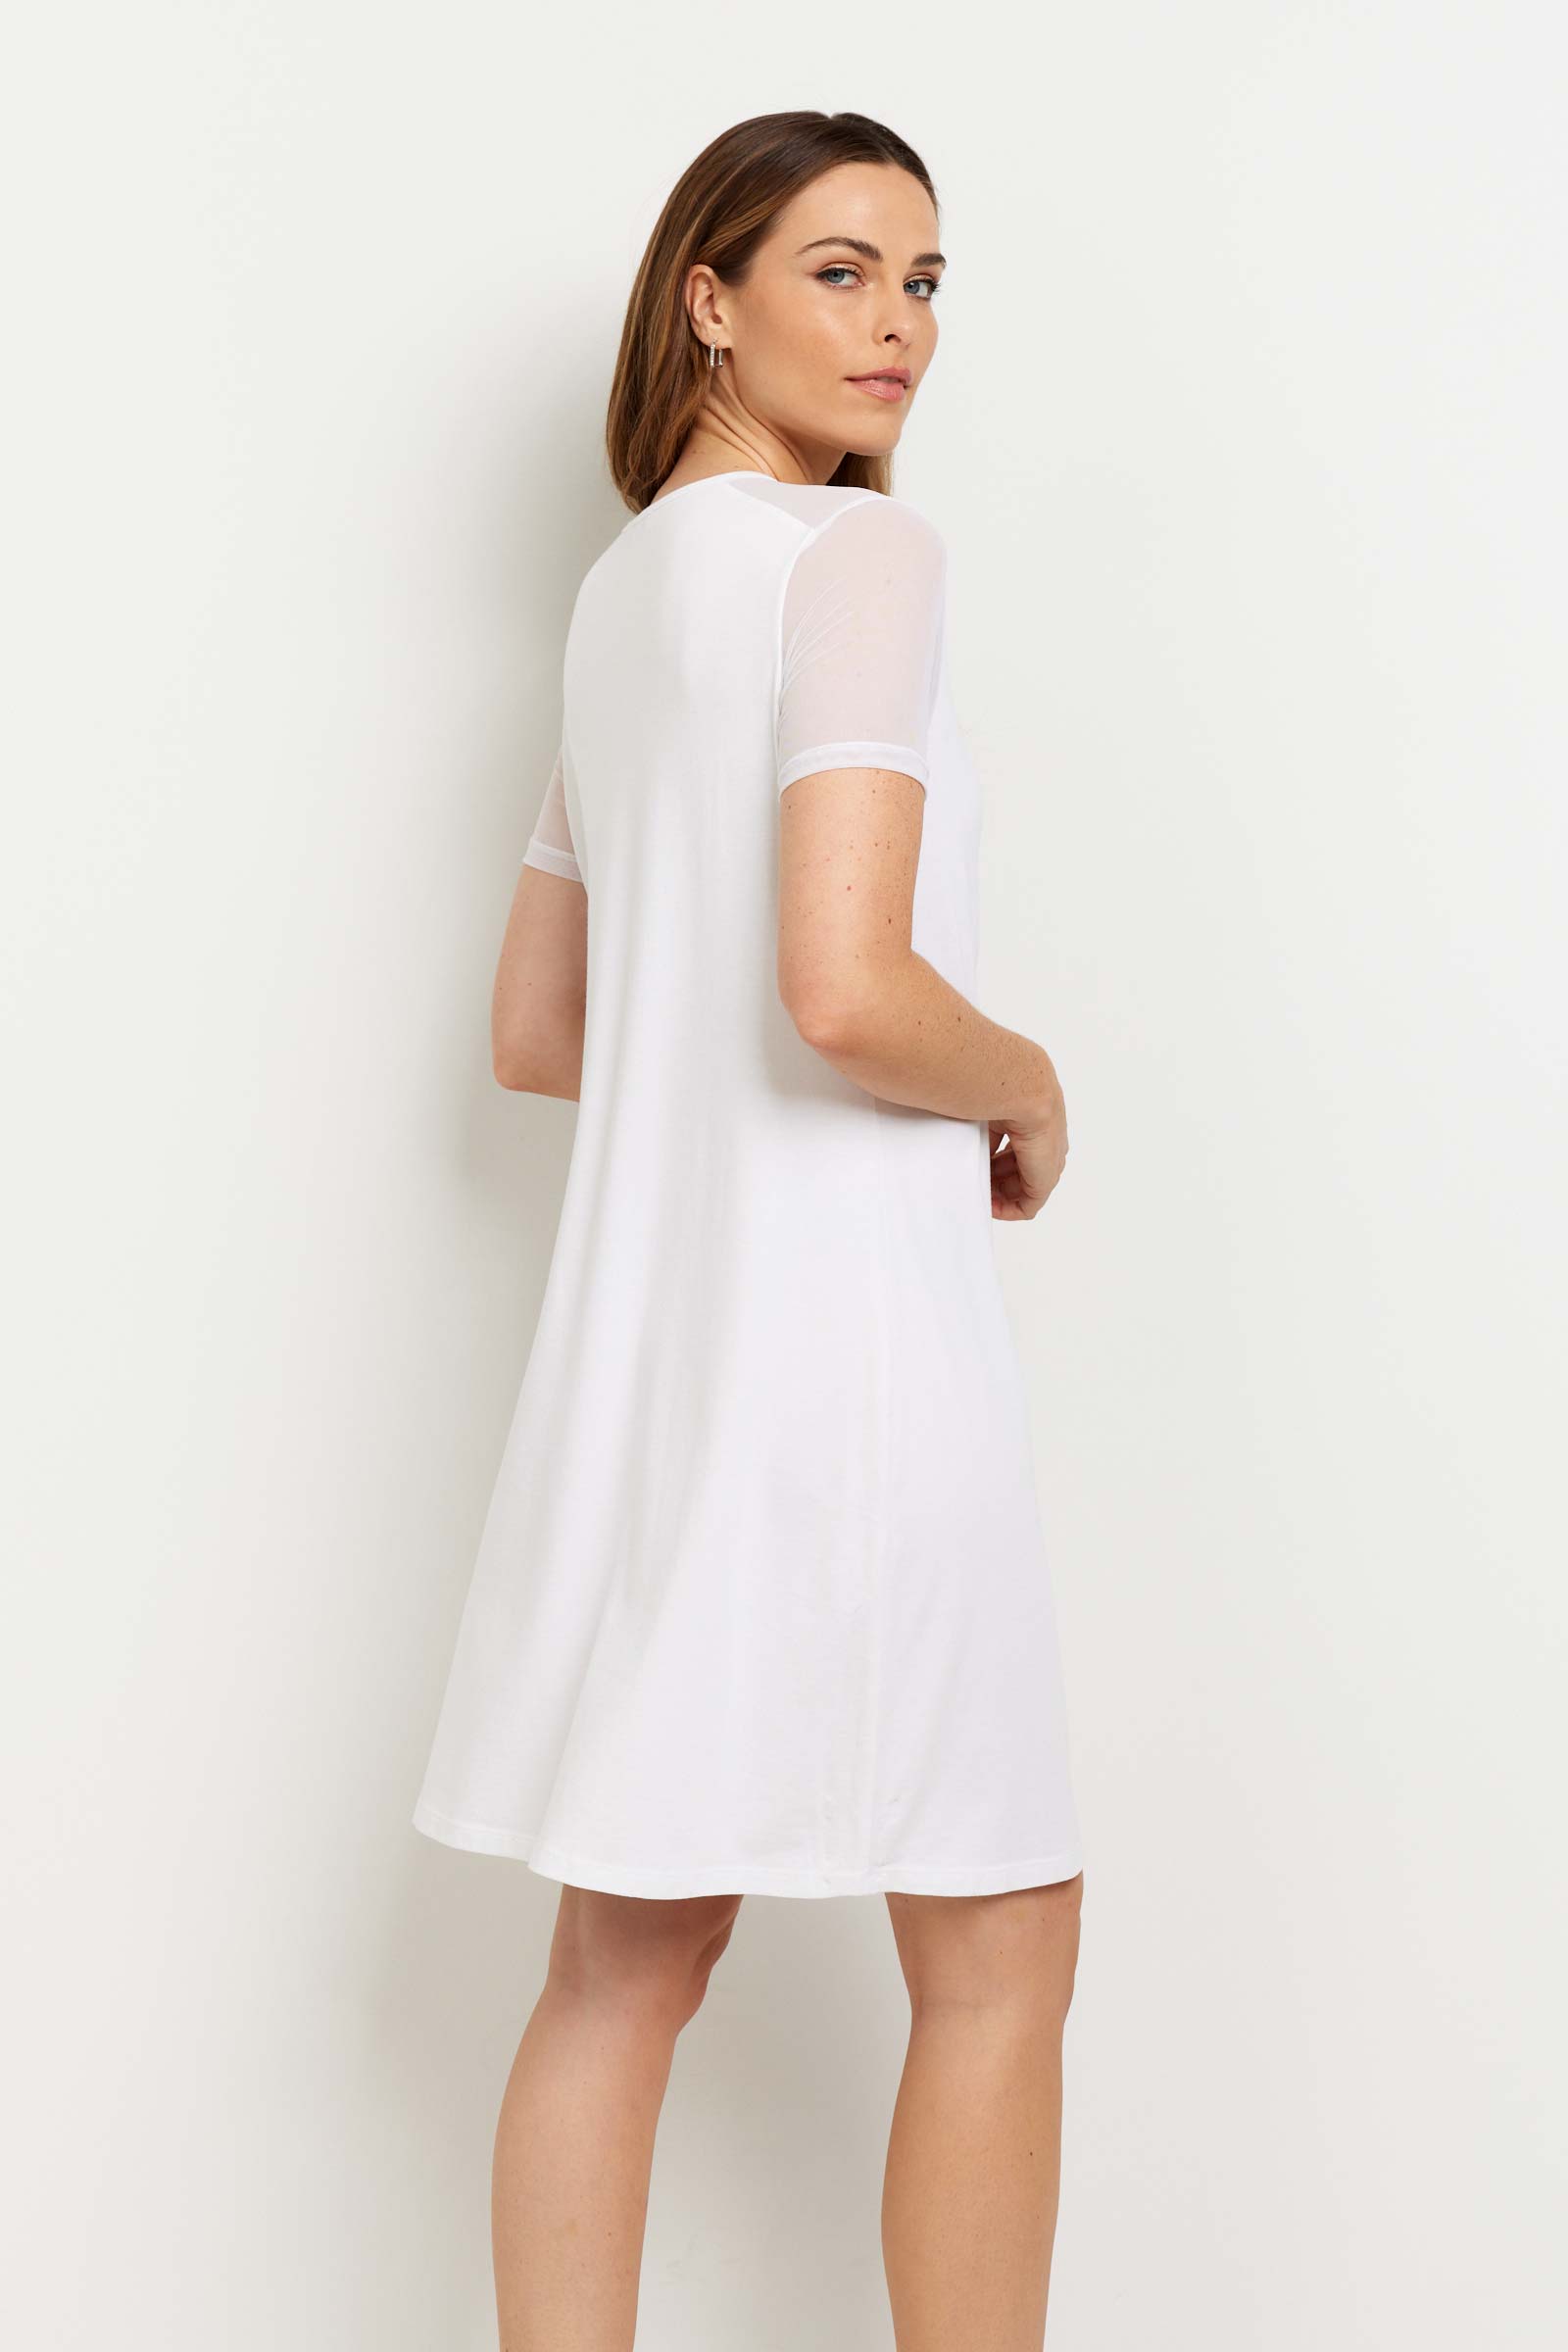 The Best Travel Dress. Woman Showing the Back Profile of a Melissa Dress in White.